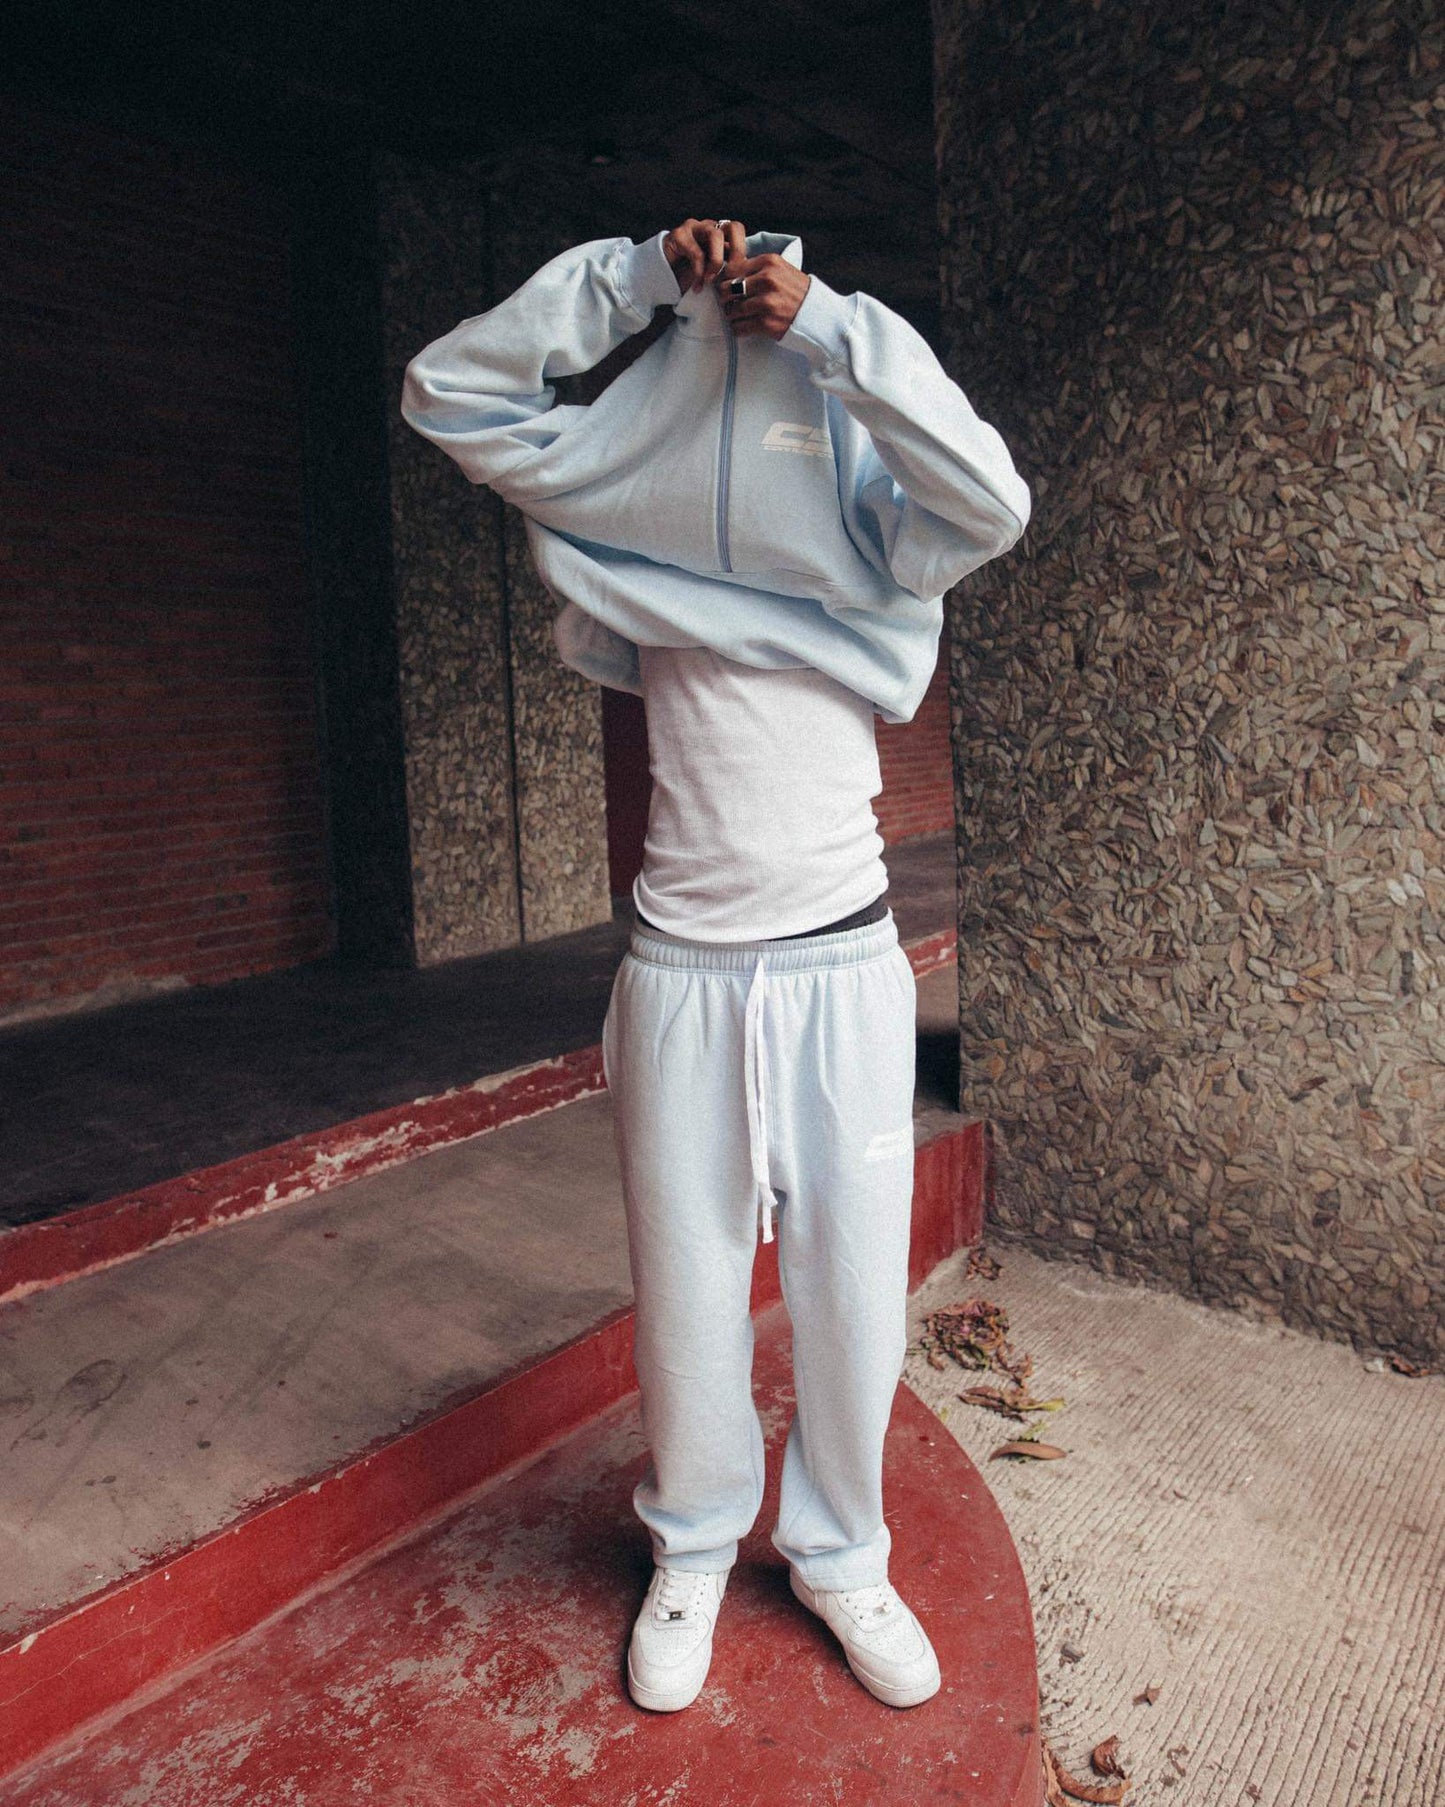 LOOSE TRACKPANTS IN POWDER BLUE